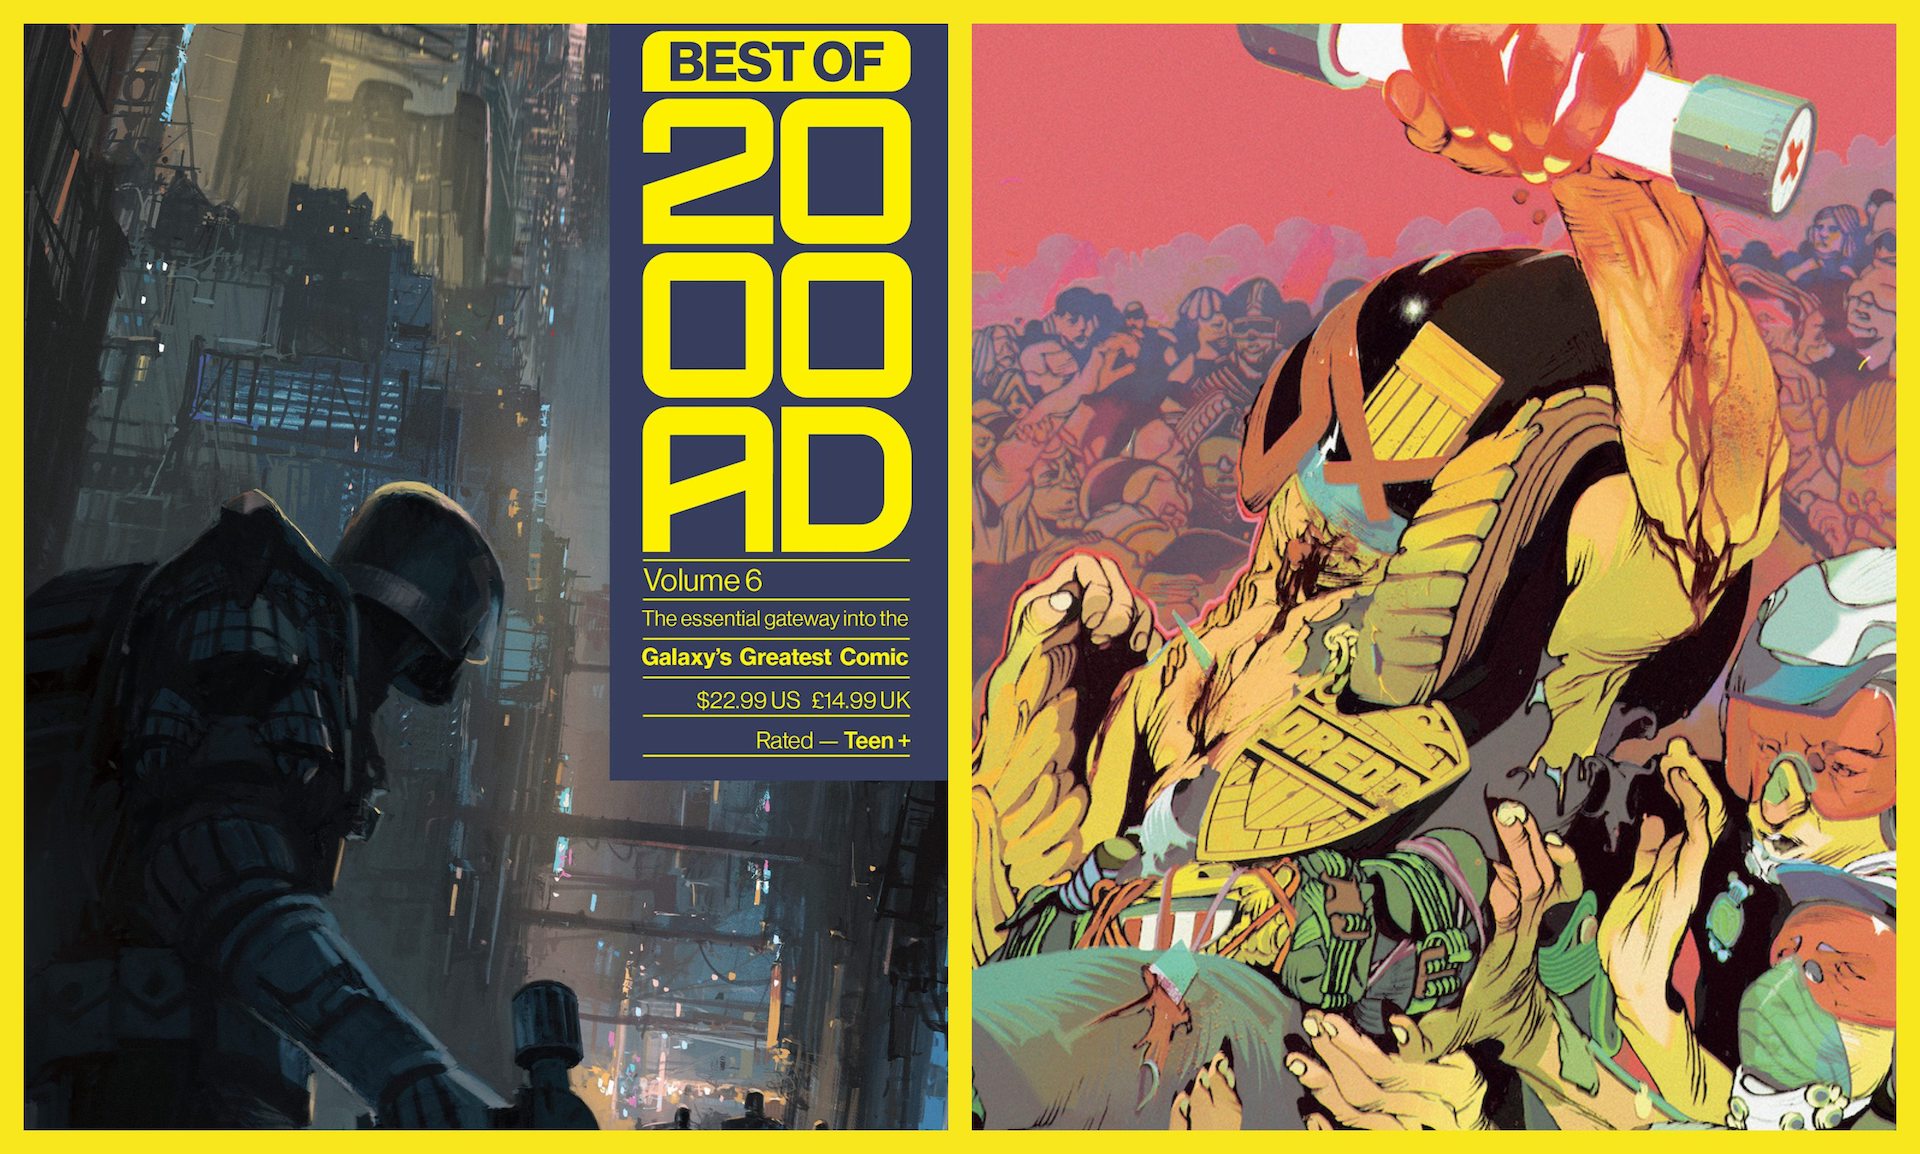 EXCLUSIVE First Look: 'Best of 2000 AD' Vol. 6 cover reveals